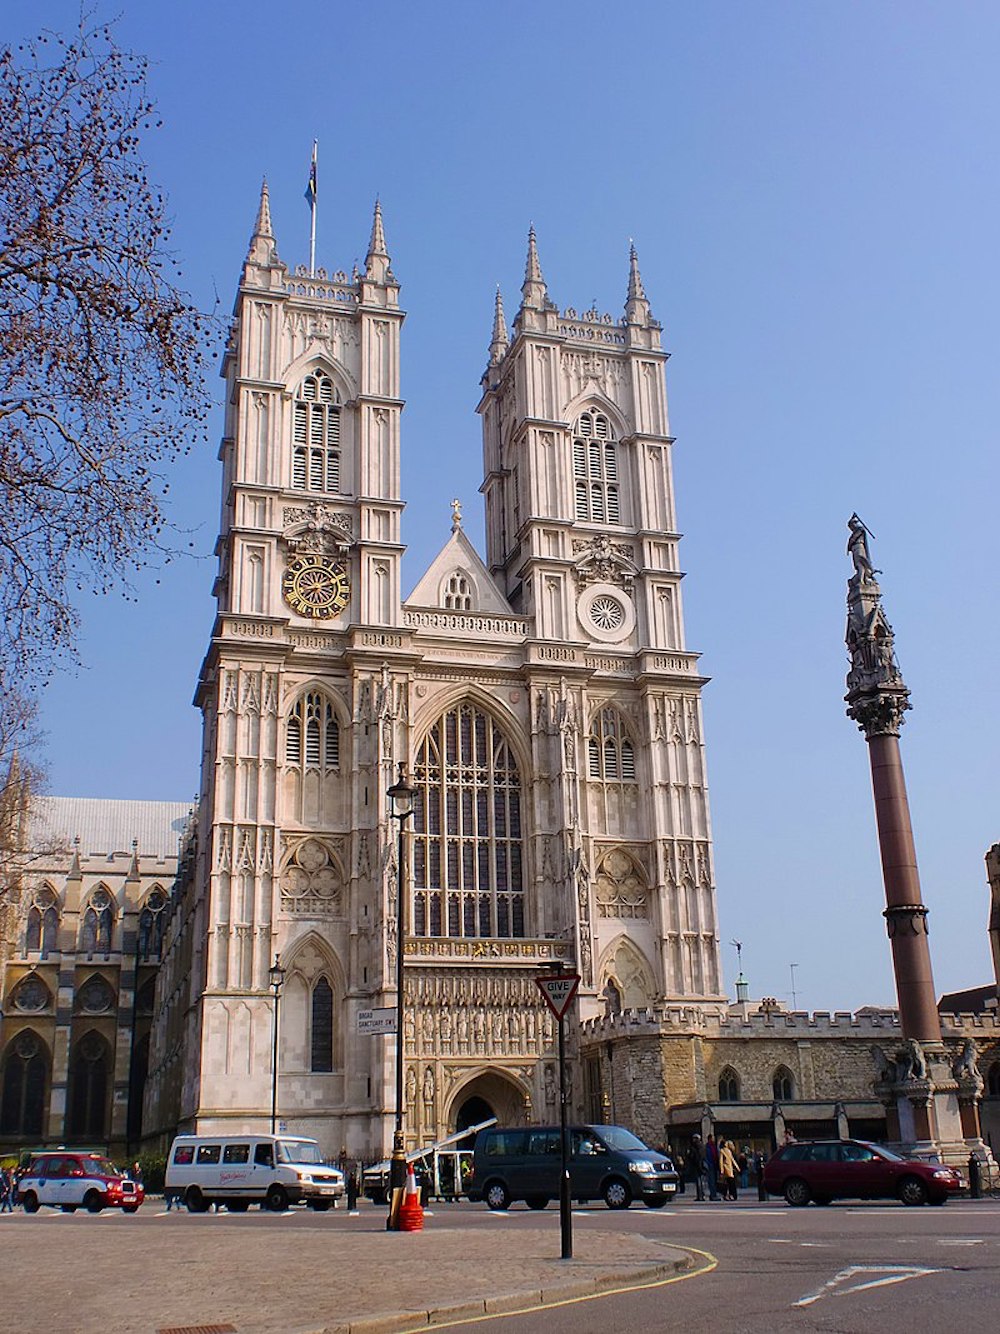 Westminster Abbey: Western façade. Photo Credit: © Σπάρτακος via Wikimedia Commons.